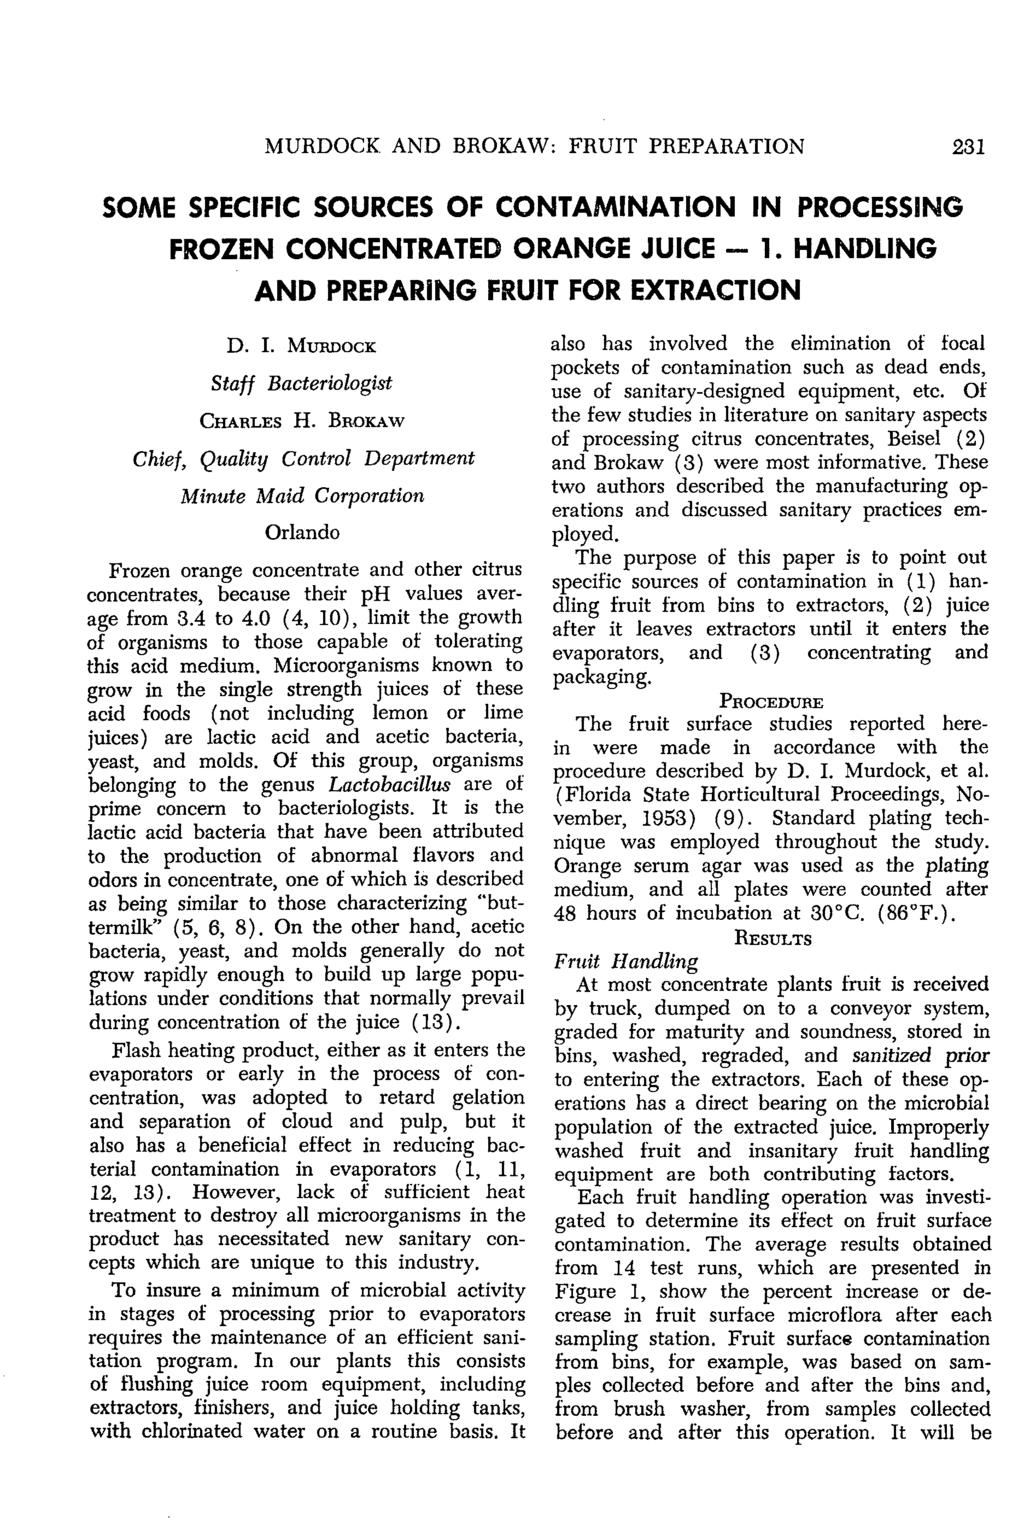 MURDOCK AND BROKAW: FRUIT PREPARATION 231 SOME SPECIFIC SOURCES OF CONTAMINATION IN PROCESSING FROZEN CONCENTRATED ORANGE JUICE - 1. HANDLING AND PREPARING FRUIT FOR EXTRACTION D. I. MUBDOCK Staff Bacteriologist Charles H.